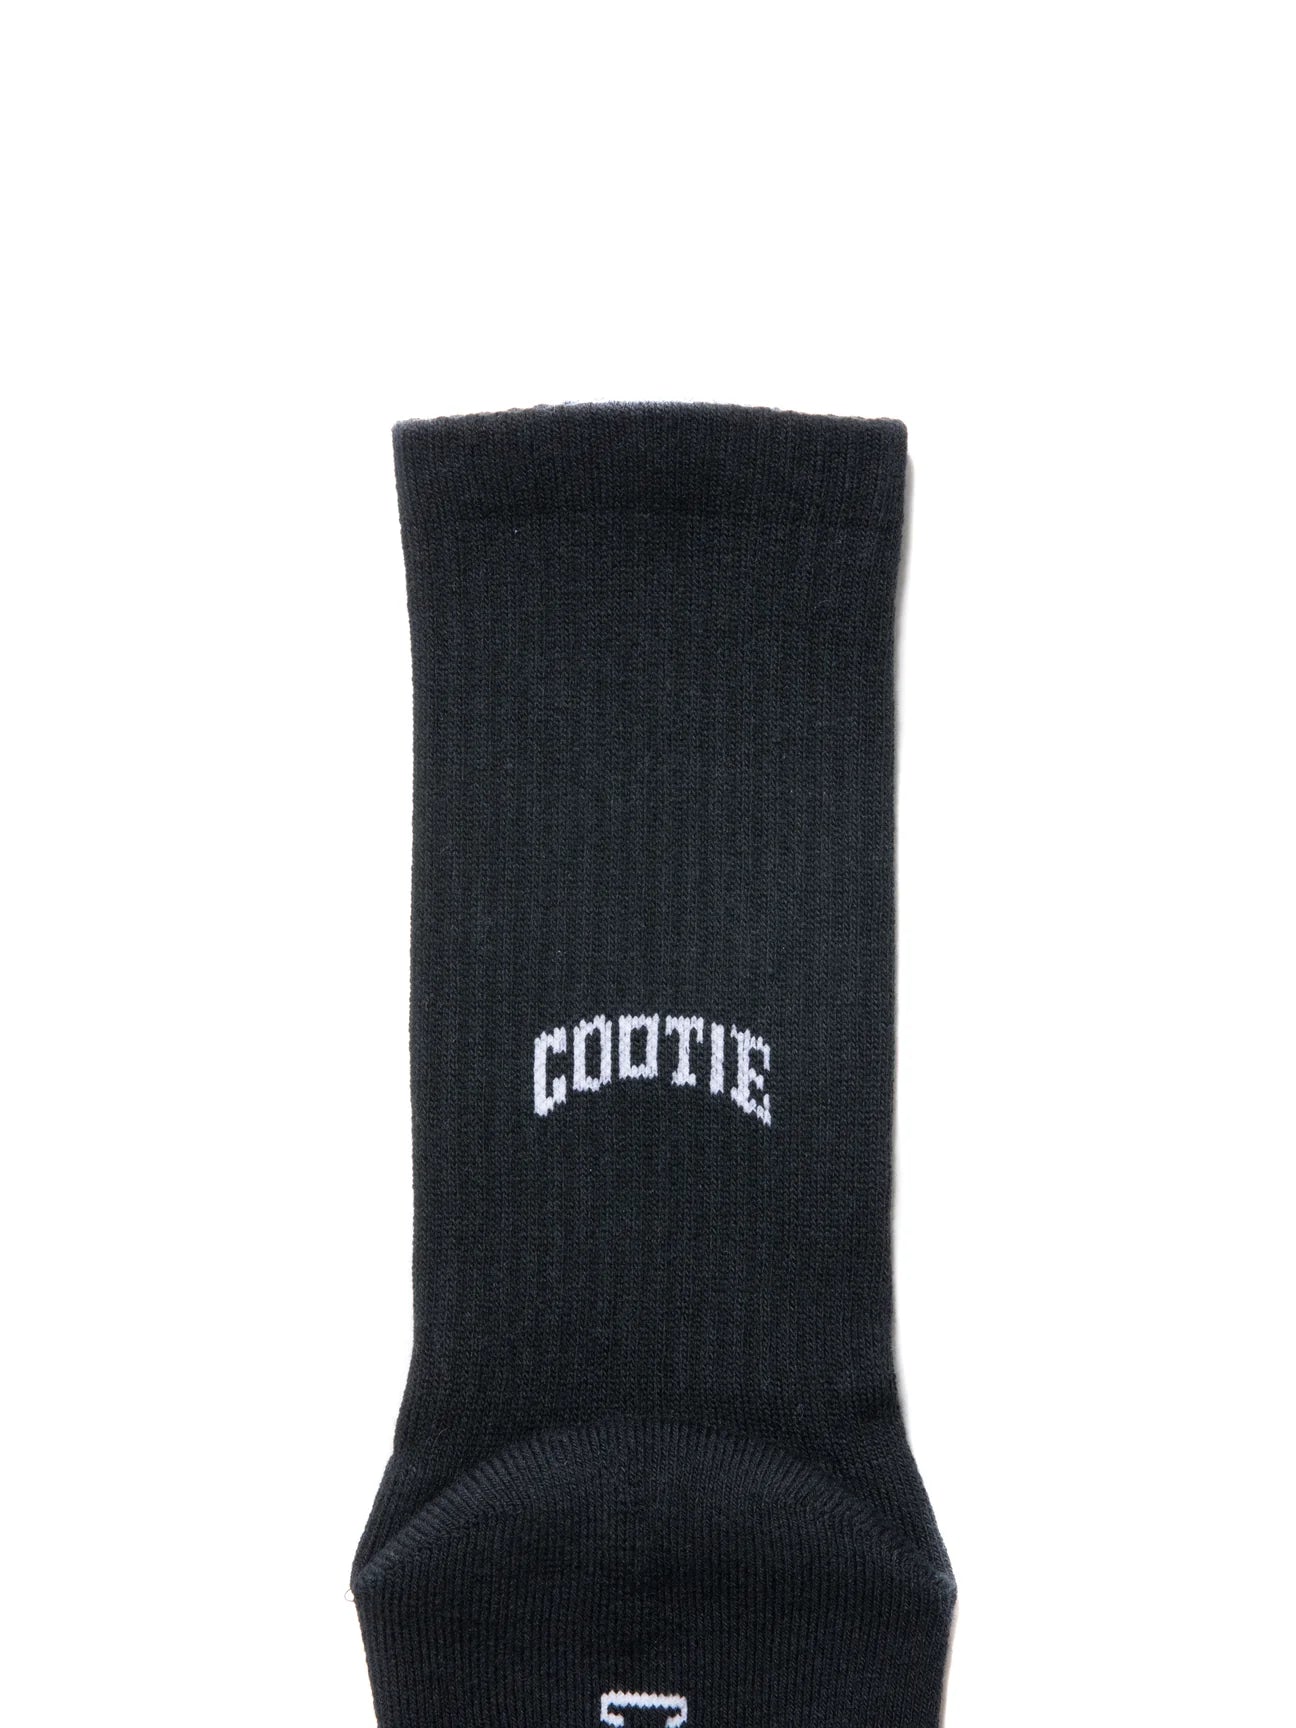 COOTIE PRODUCTIONS® / Raza Middle Socks